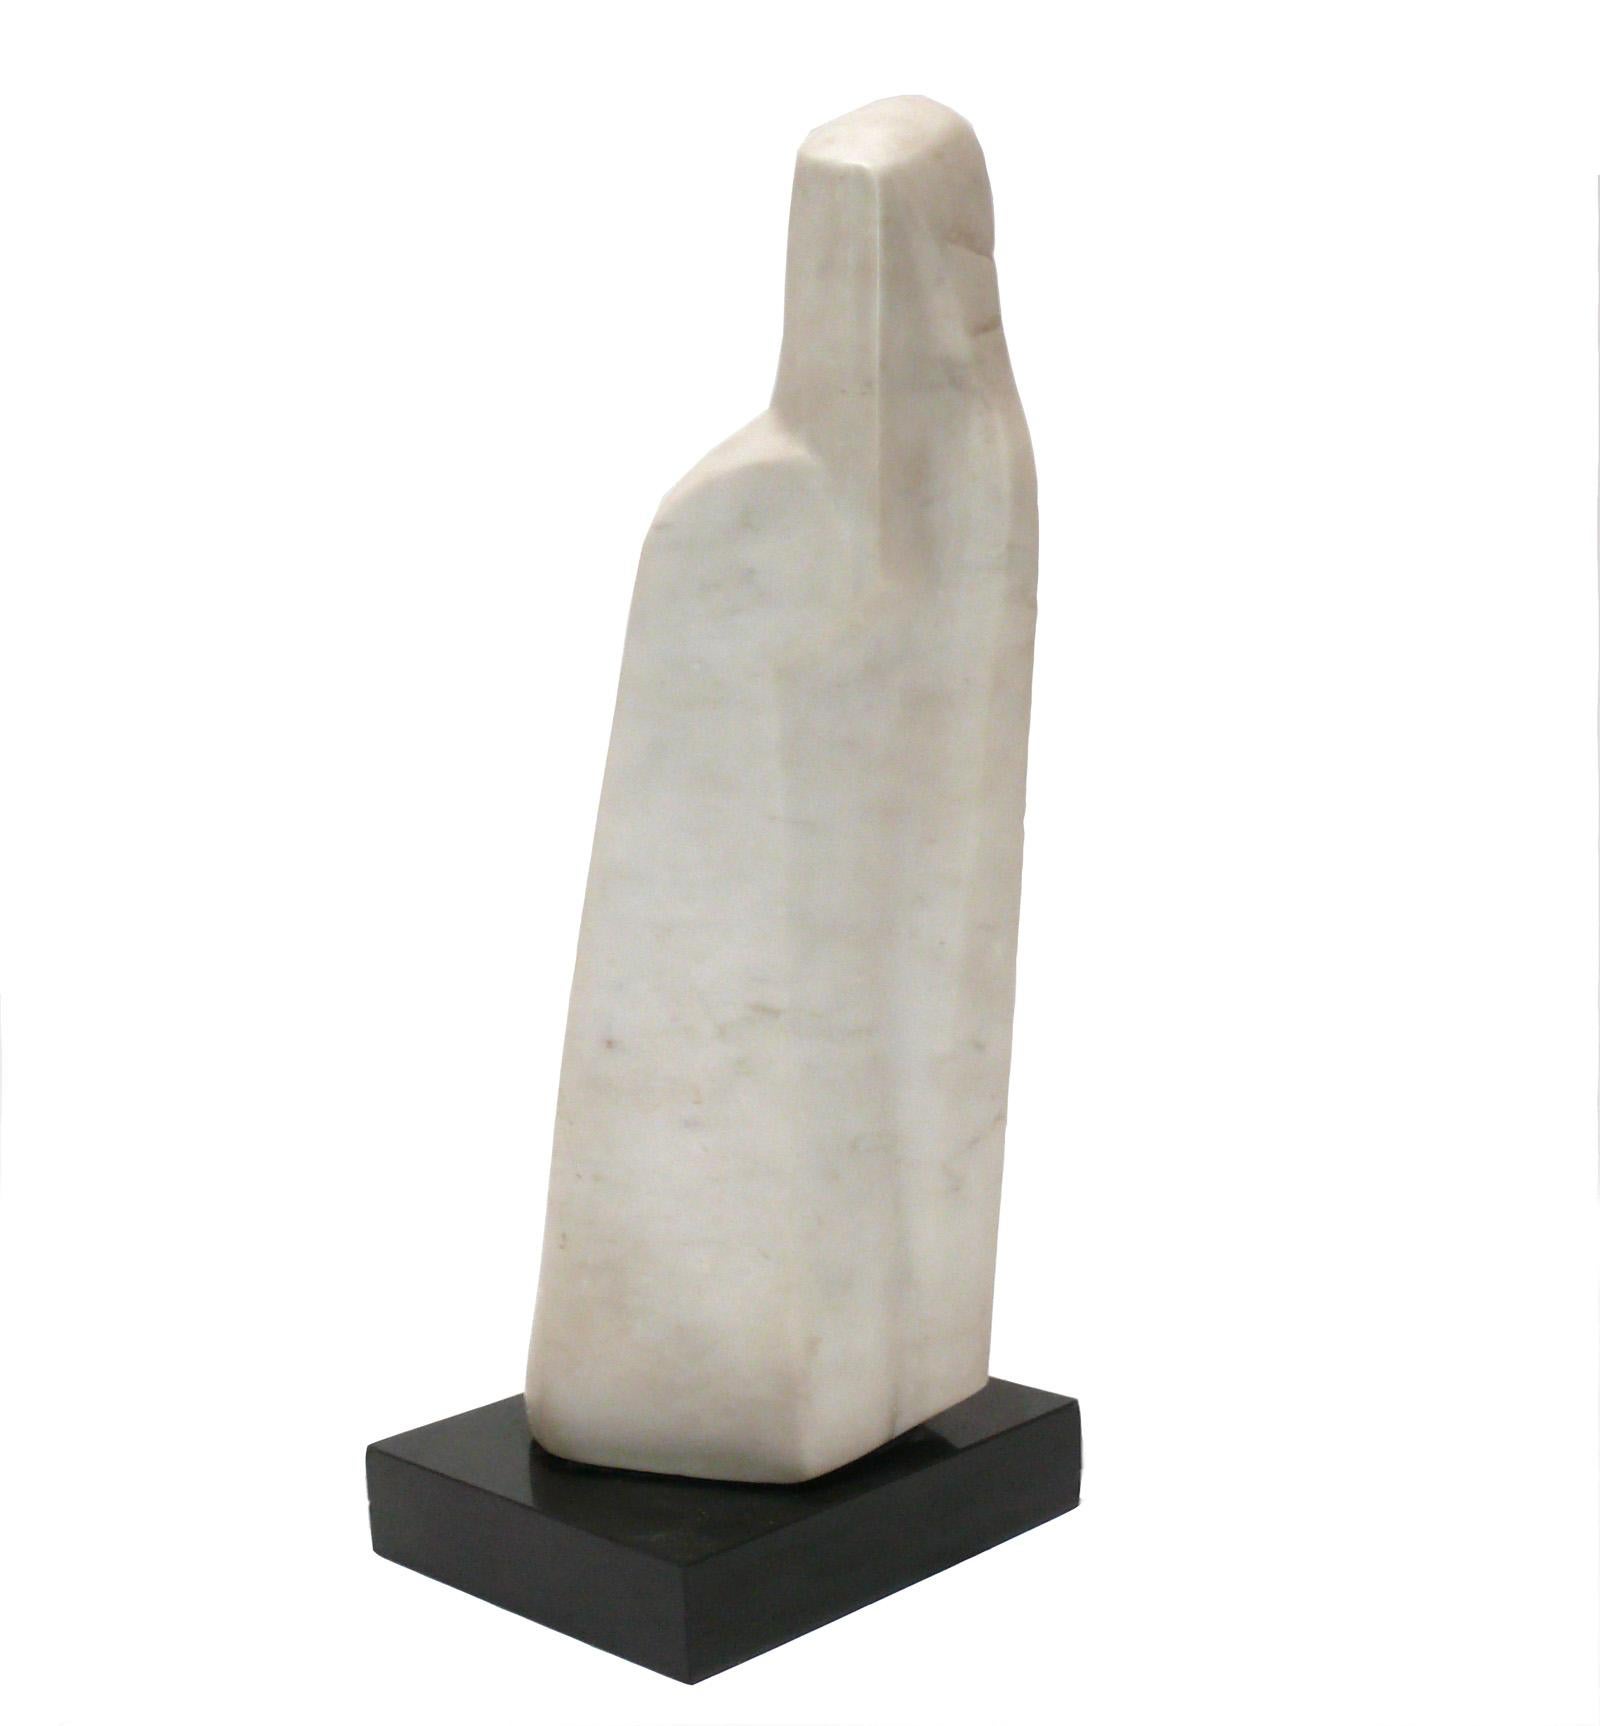 American Modernist White Marble Sculpture by Michel Elia France circa 1970s 18.75